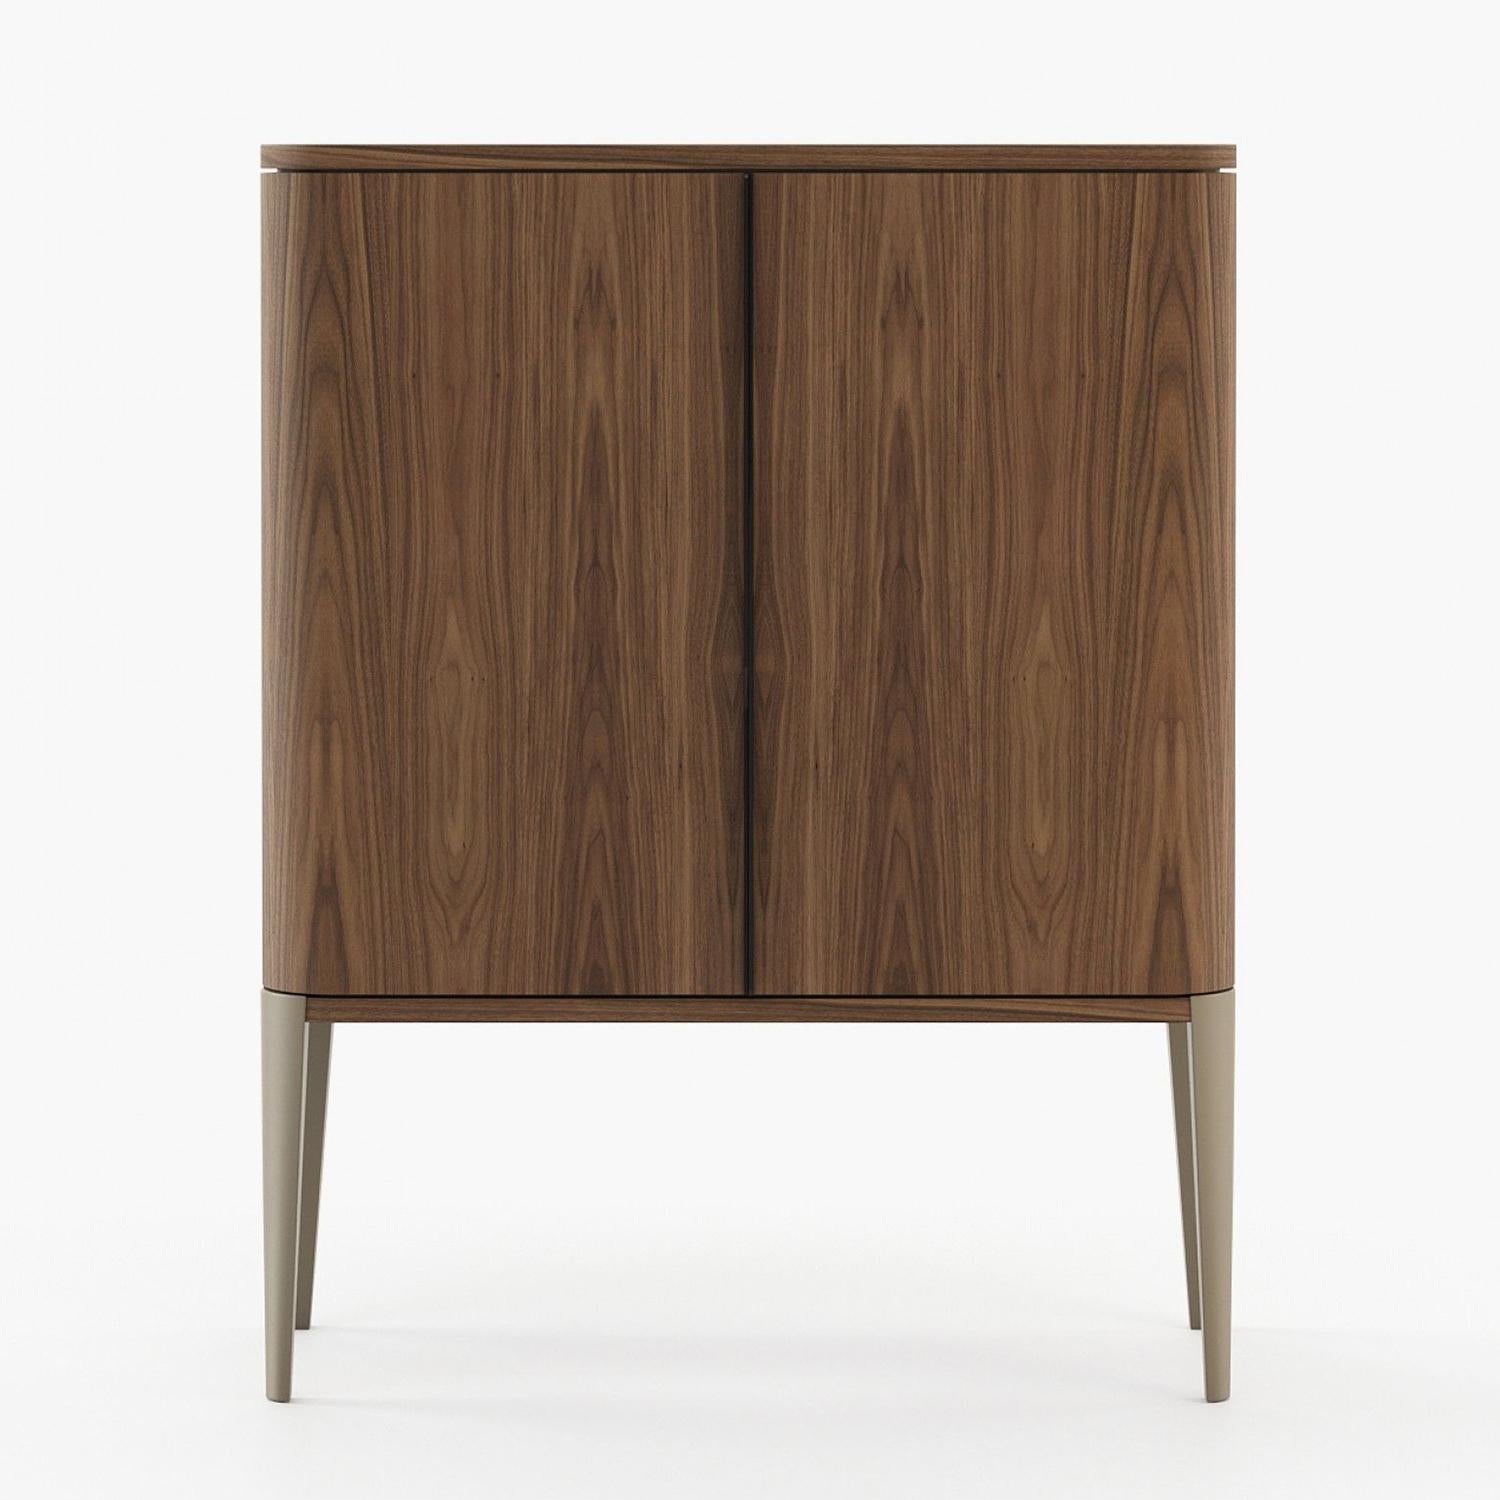 Bar Nova Walnut with structure in walnut wood
vennered, with 2 doors, with 1 drawers with easy
glide system and with clear glass back inside.
Also available on request with other wood finishes.